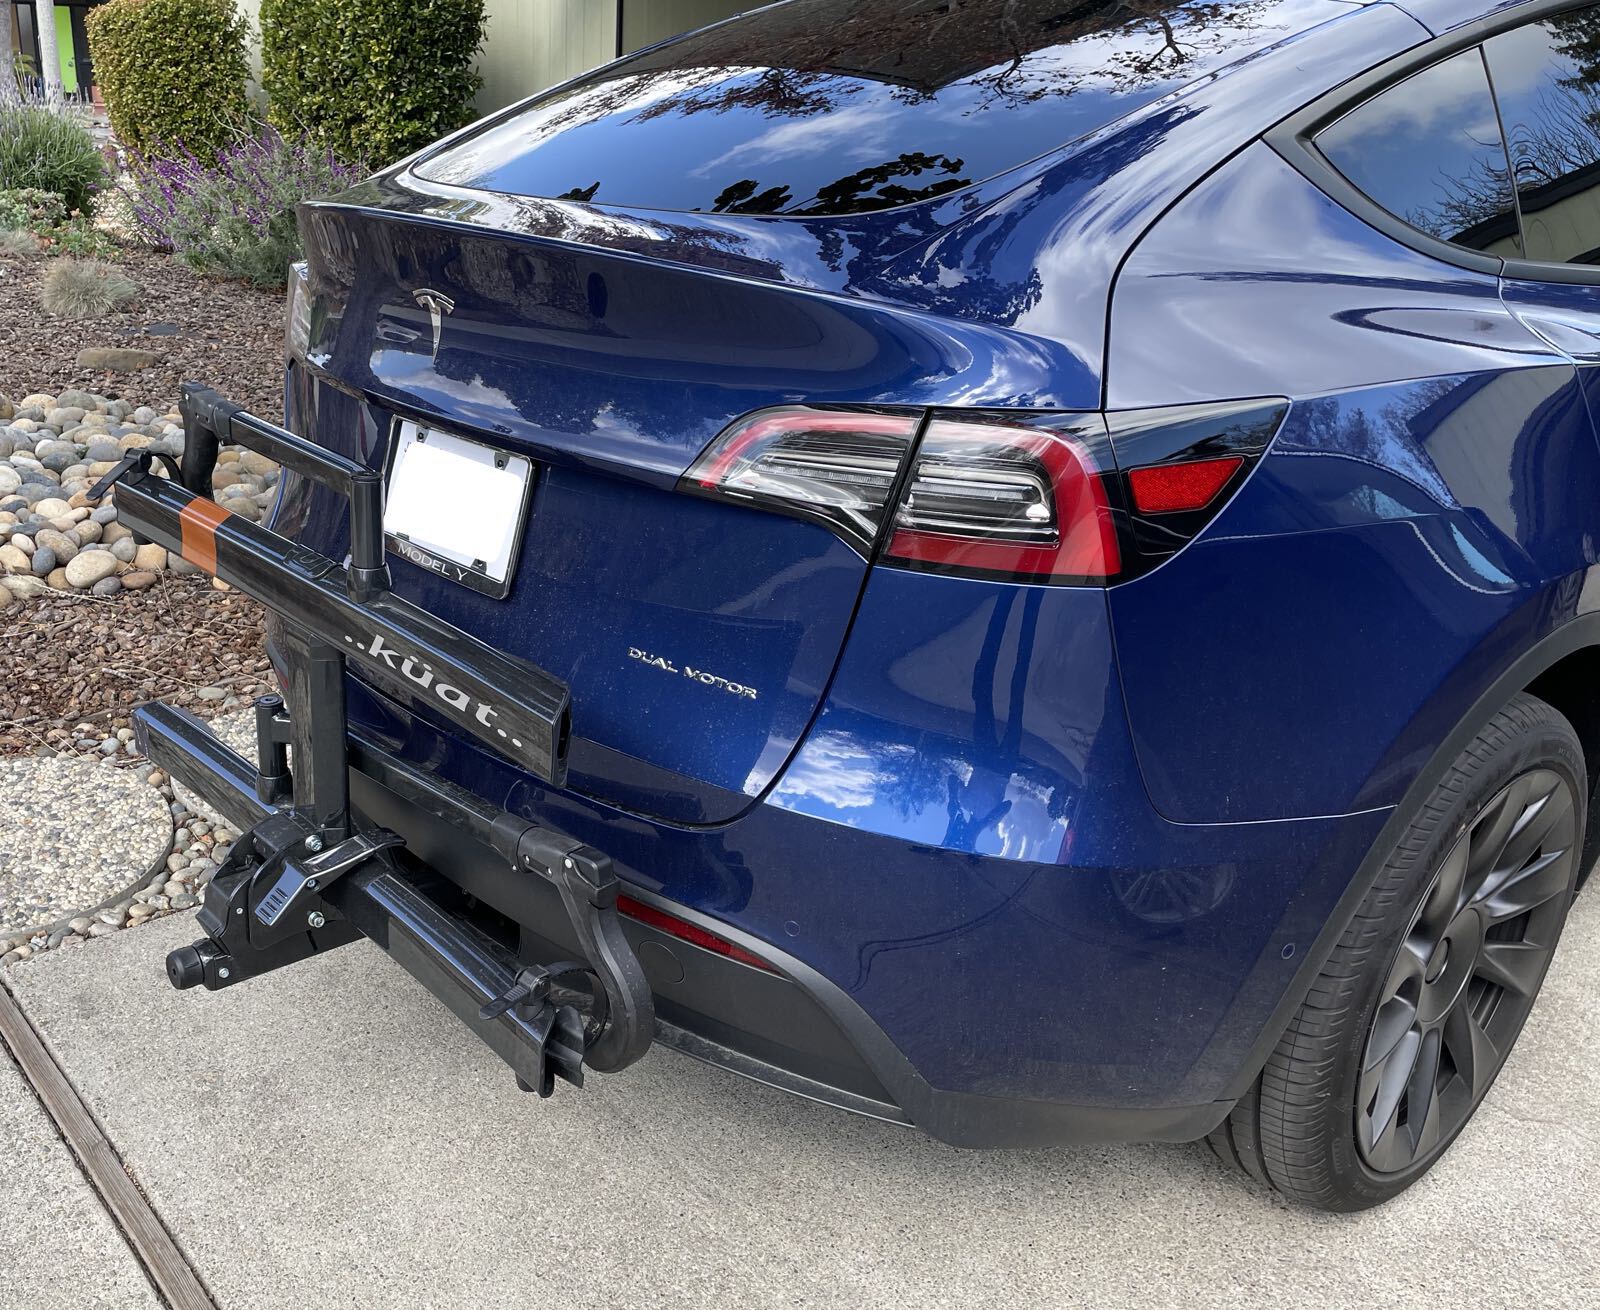 Tesla Model Y Energy Consumption With and Without Bikes on Rack | Electronics etc… Best Bike Rack For Tesla Model Y